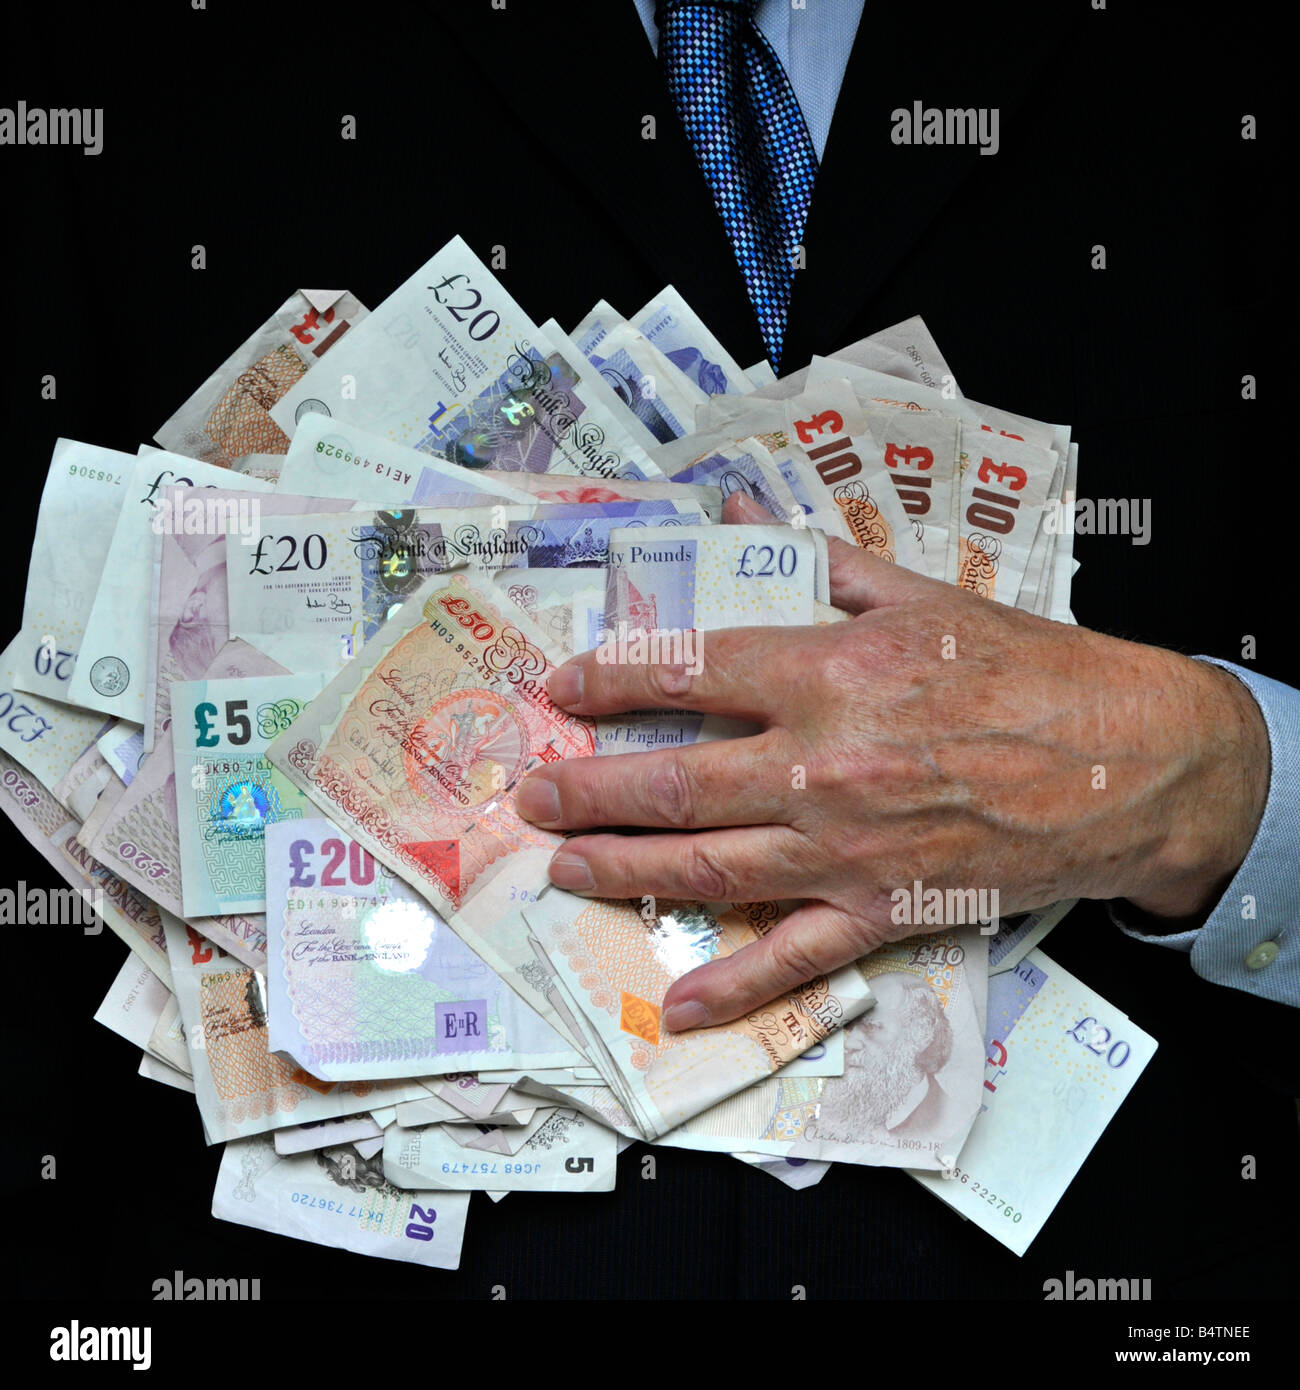 Man in dark office business suit hand on close up stack of money bank notes uk cash currency concept for bankers fat cats greed Men in Suits Lifestyle Stock Photo